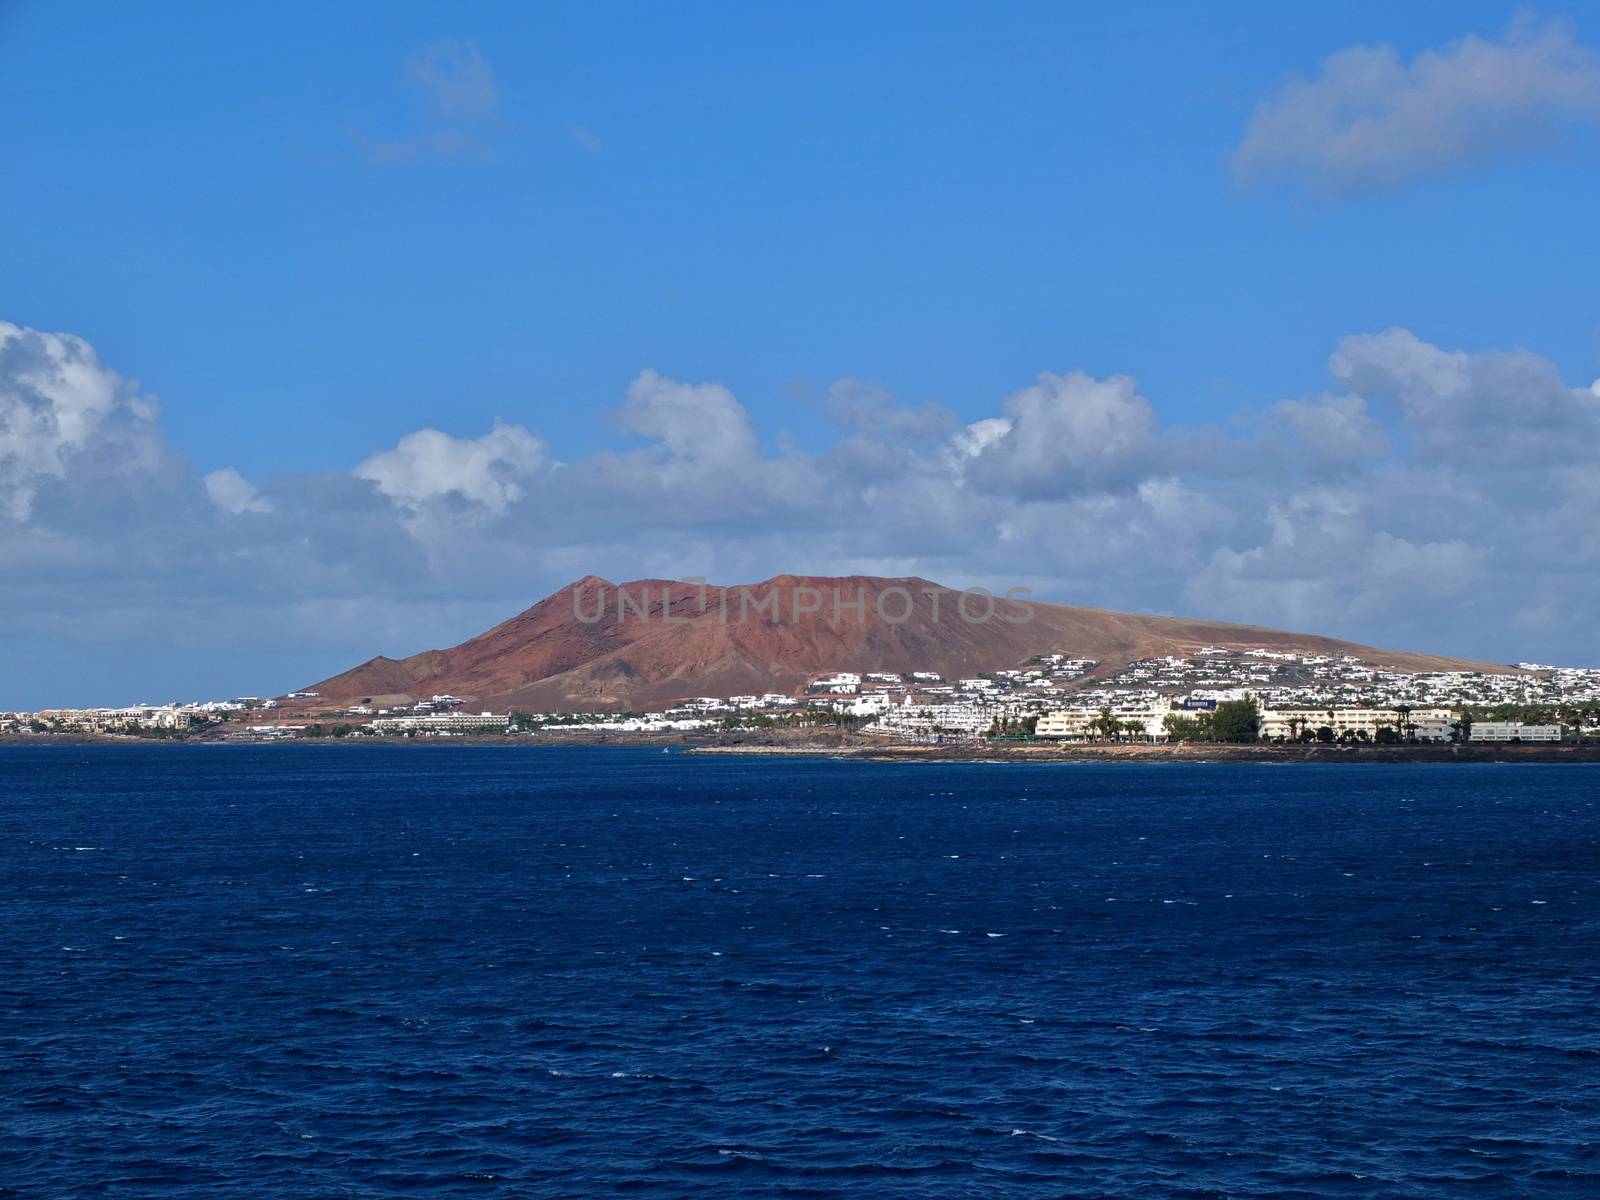 Lanzarote from boat on the way to Fuerteventura